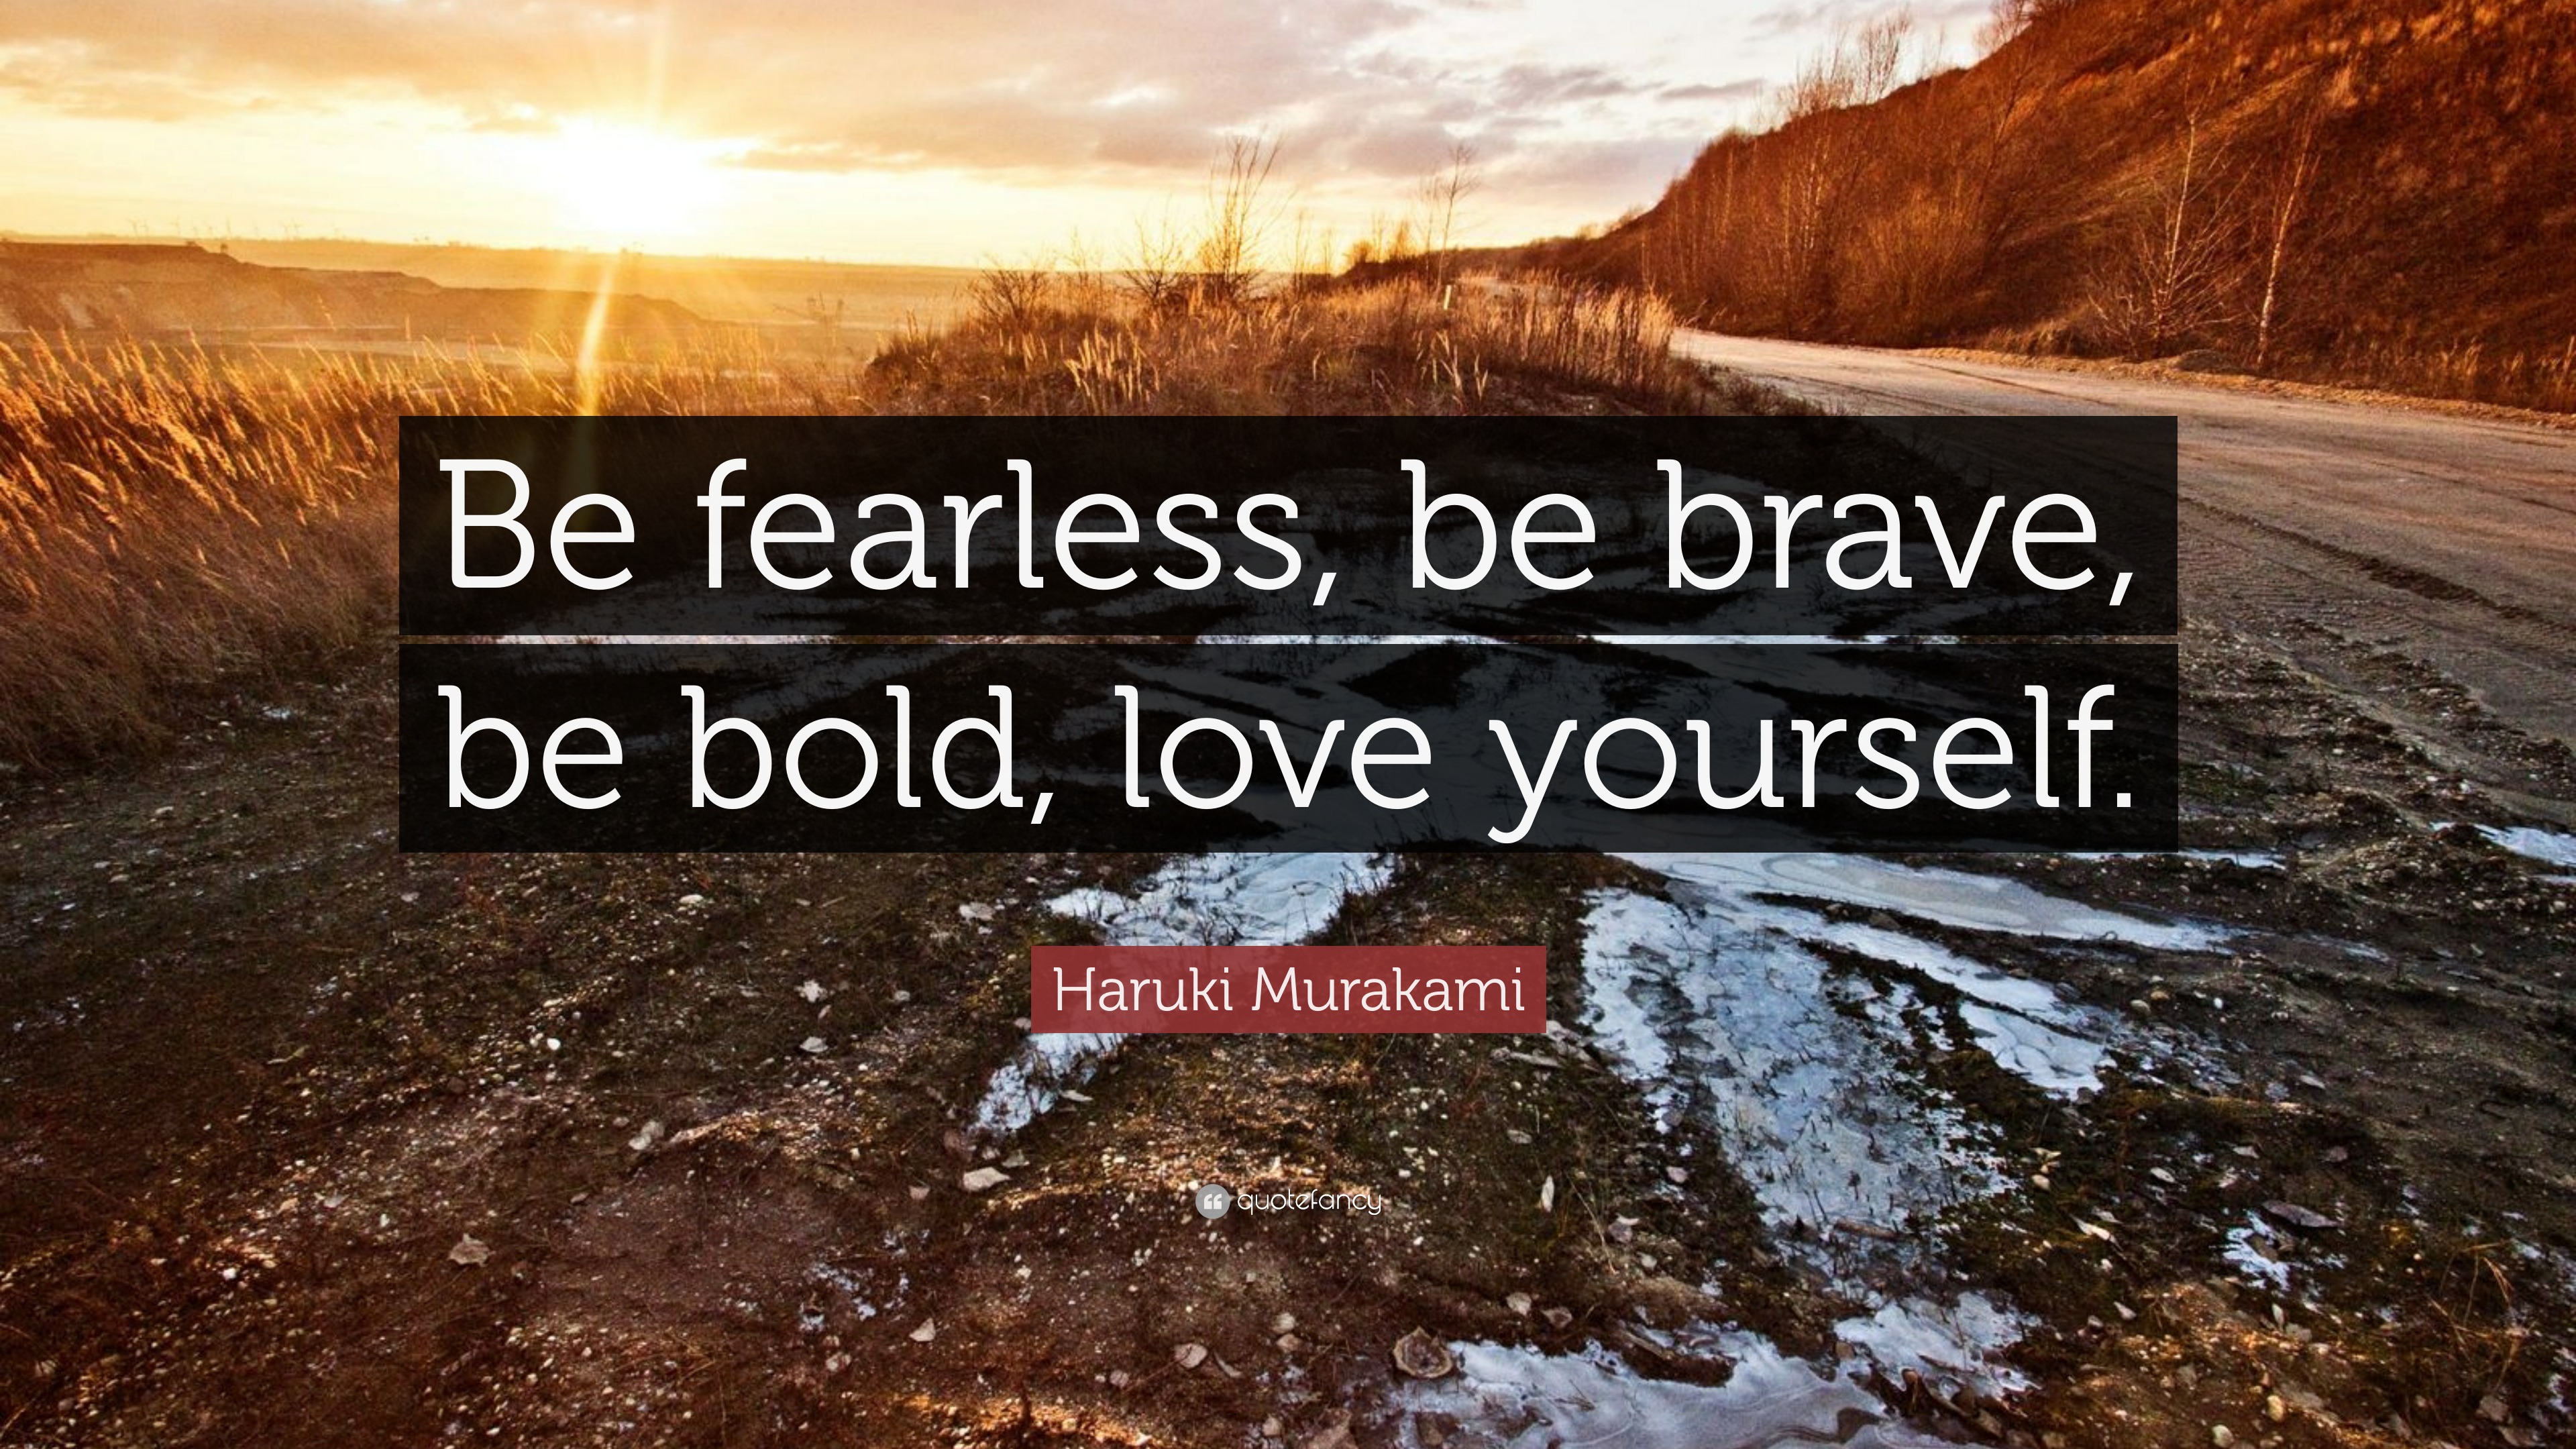 Haruki Murakami quote: Be fearless, be brave, be bold, love yourself